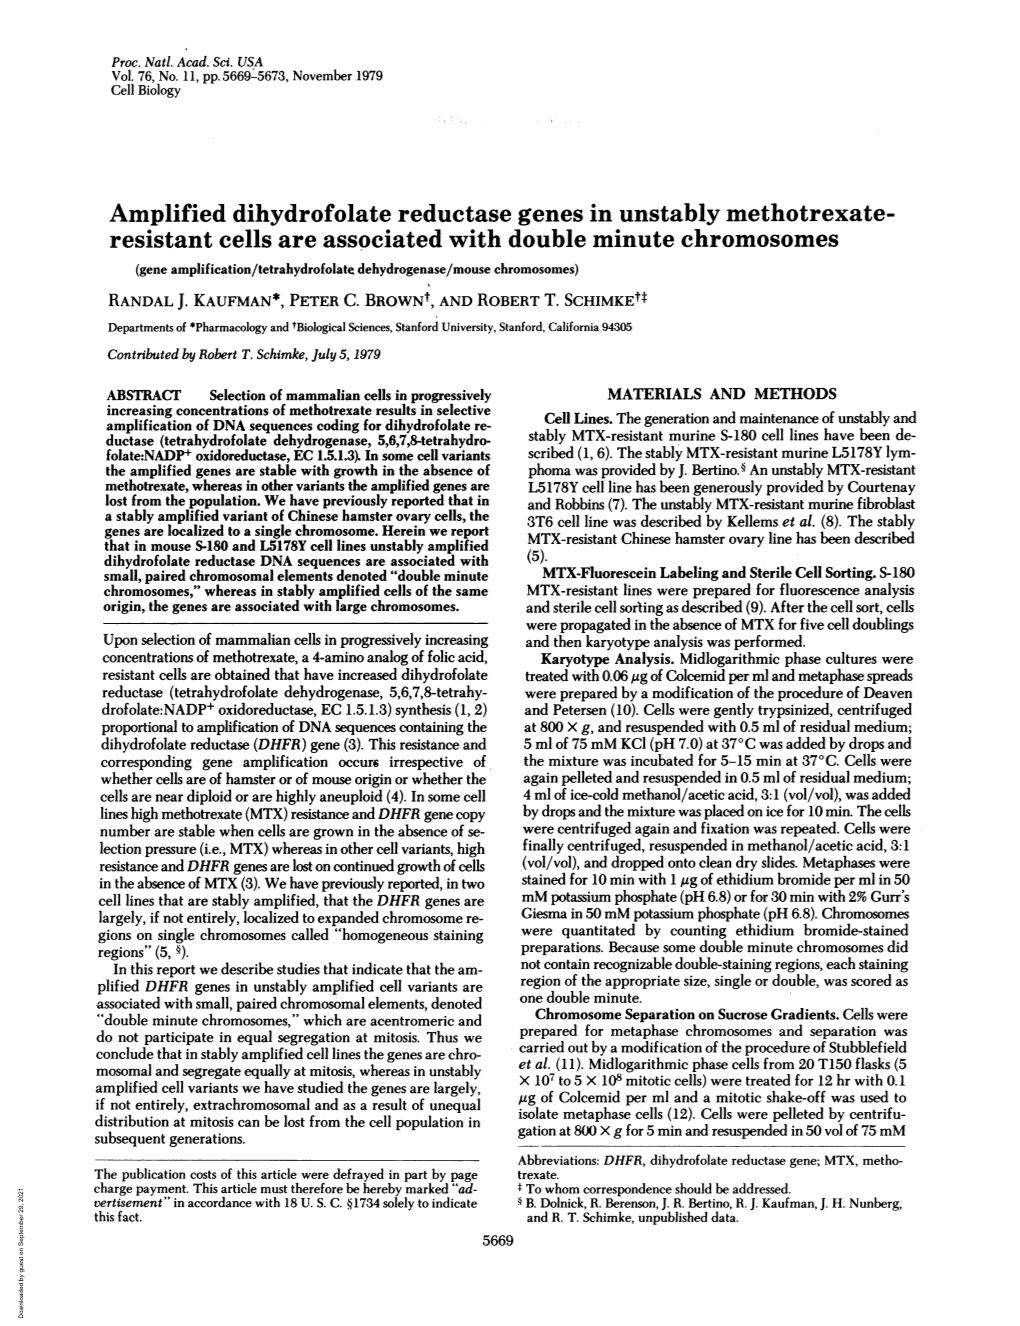 Amplified Dihydrofolate Reductase Genes in Unstably Methotrexate